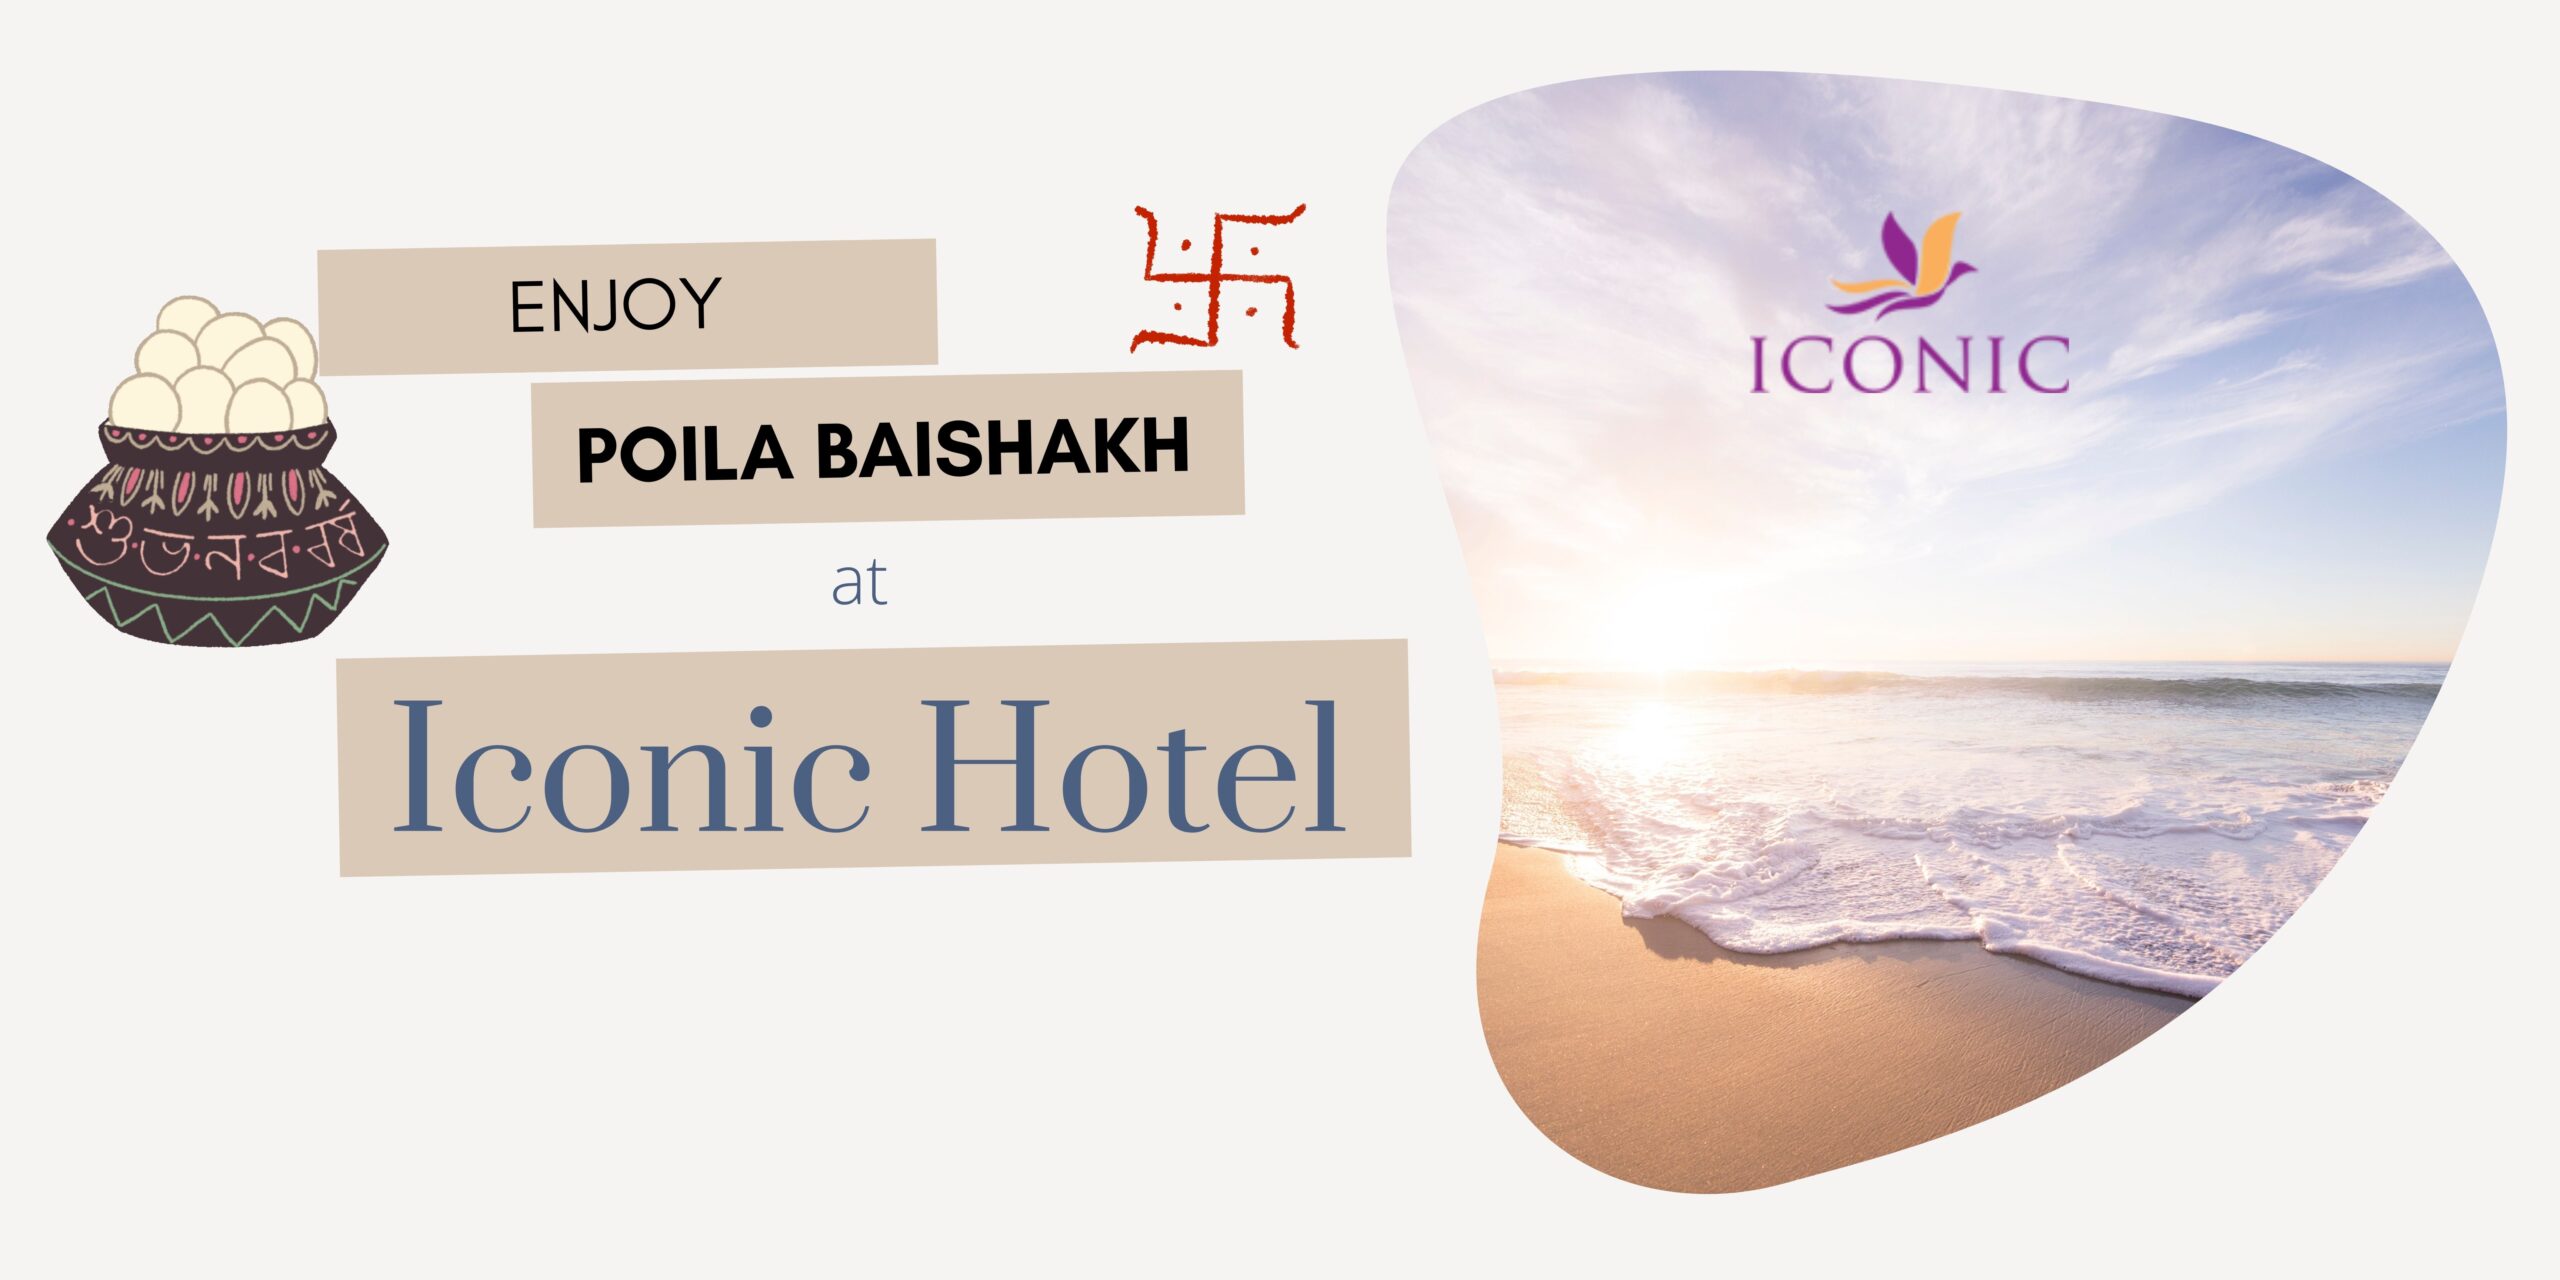 Iconic Hotel: The Best Hotel In Digha To Choose For Enjoying Poila Boishakh 1429 Fun